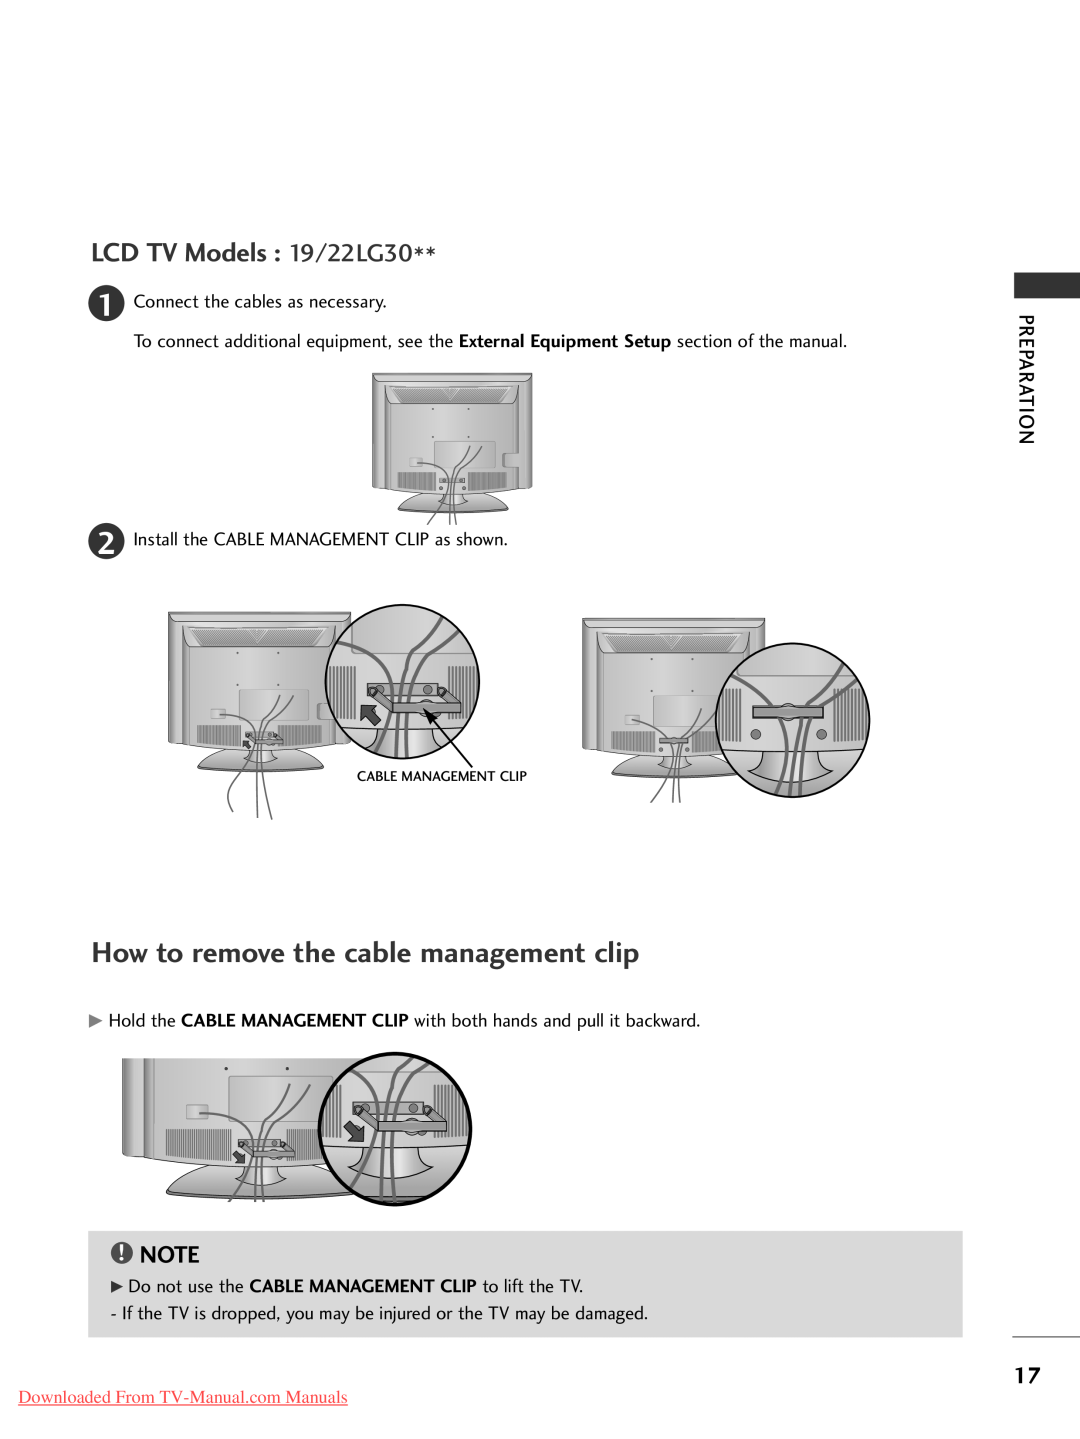 LG Electronics 19 9L LG G3 30, 42 2P PG G3 30 owner manual How to remove the cable management clip, LCD TV Models 19/22LG30 